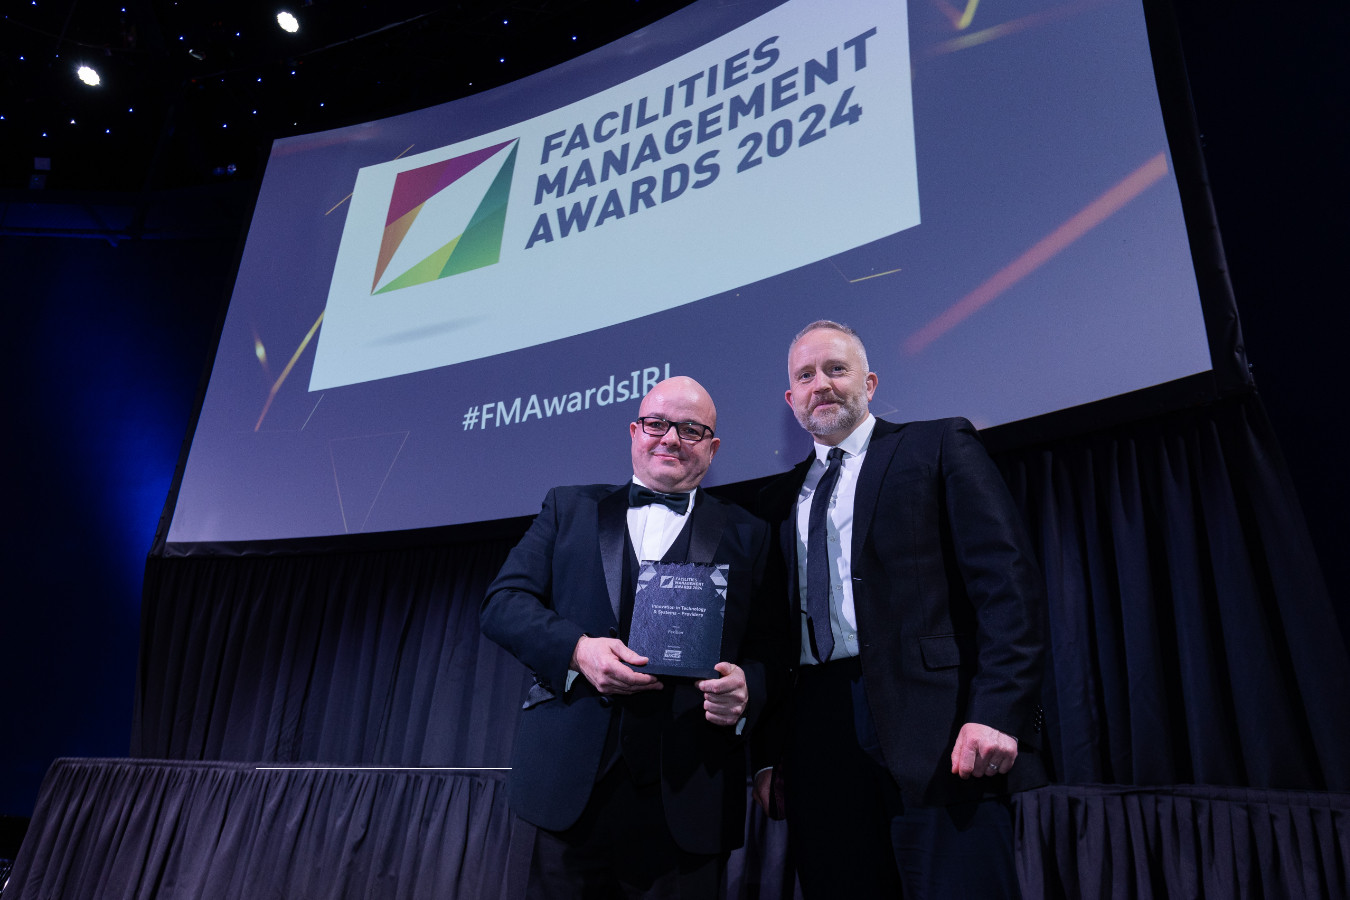 Fexillon Winner in Facilities Management Awards 2024 for Innovation in Technology & Systems